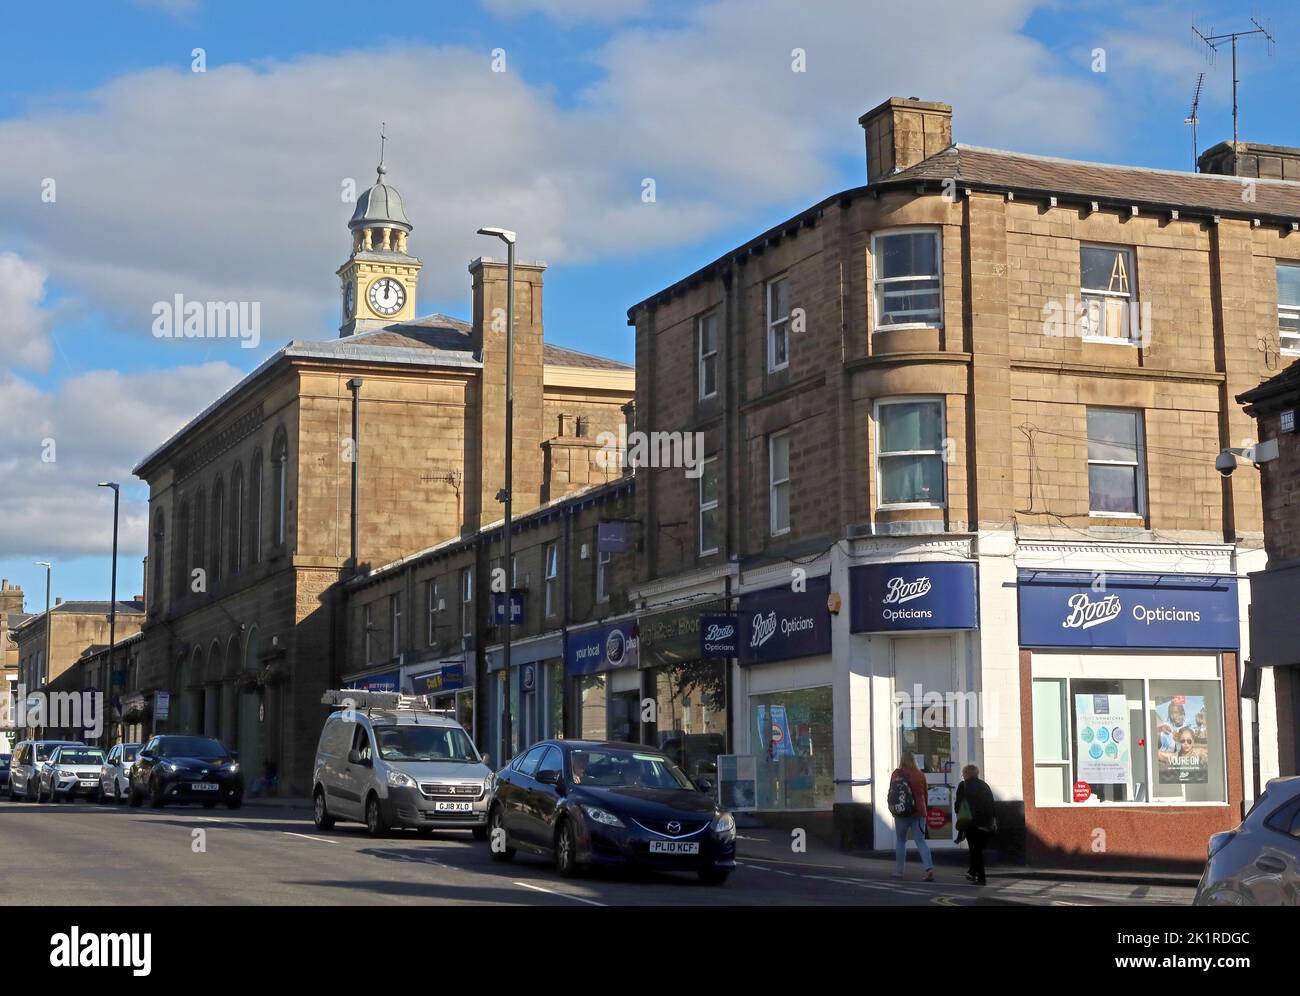 View of  Glossop town hall, clock tower and High Street West shops, including Boots Opticians, Glossop, High Peak, Derbyshire, England,UK, SK13 8AL Stock Photo